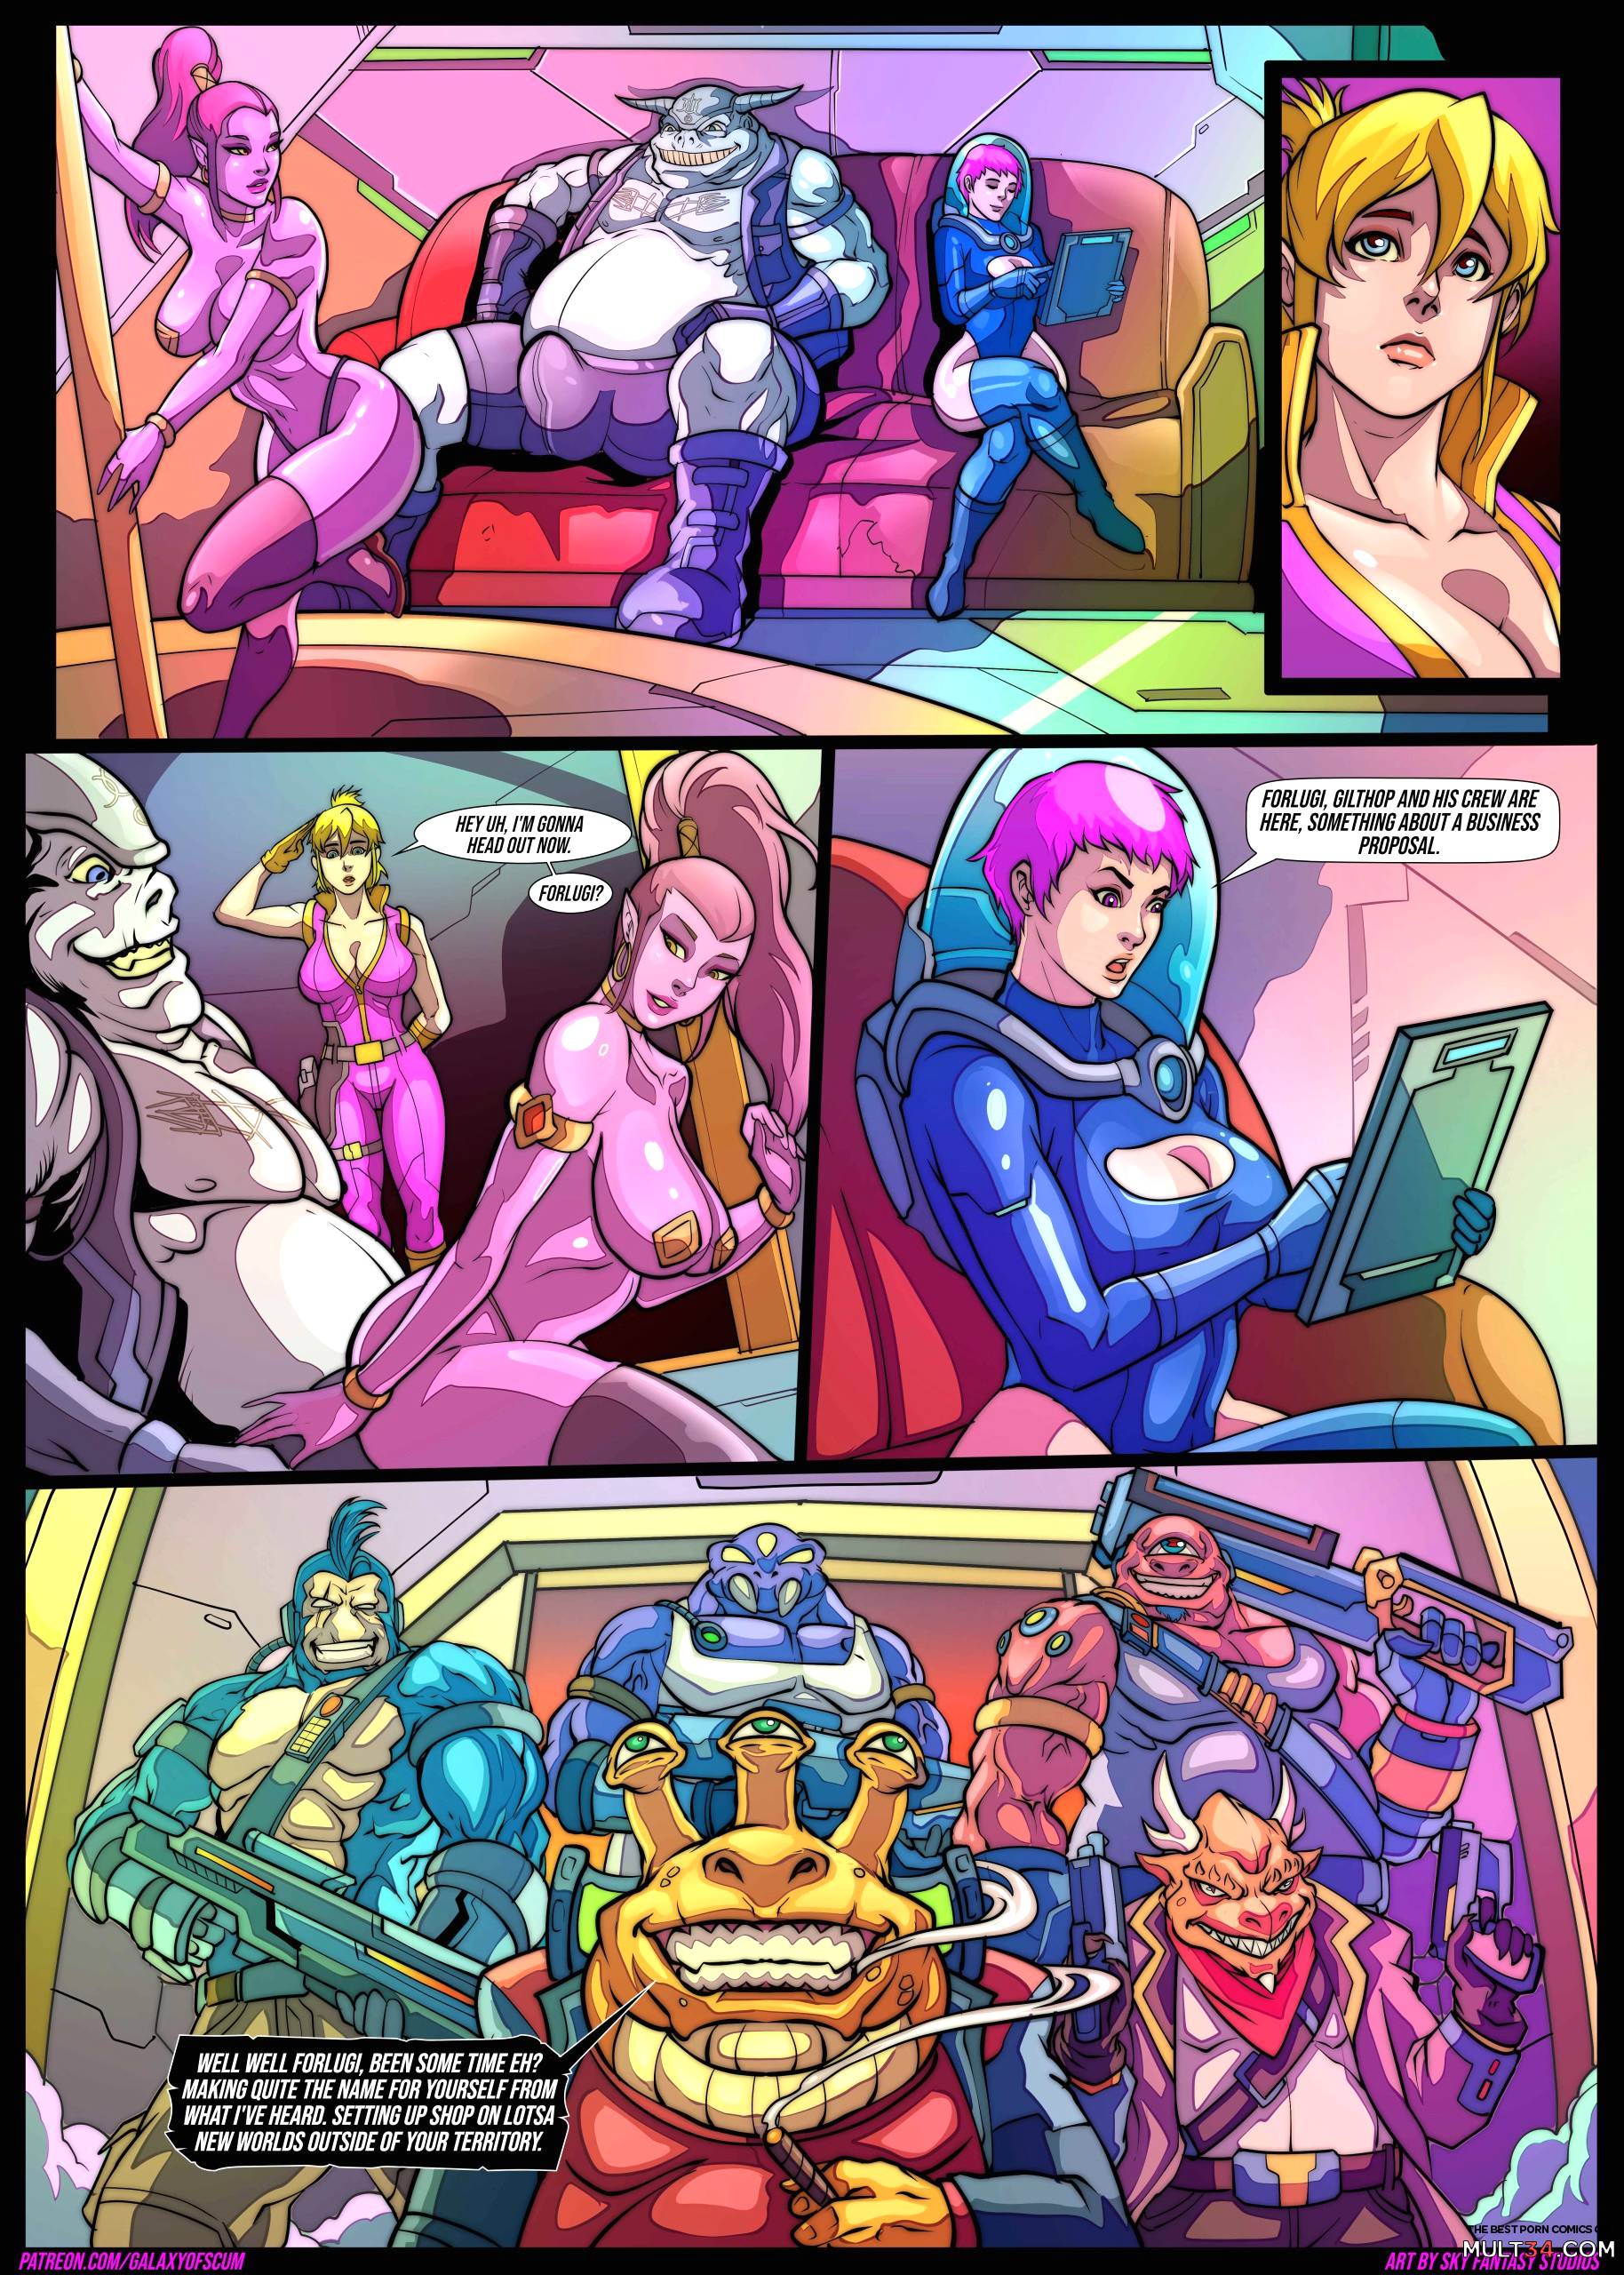 Galaxy of Scum Issue 2: Smuggler's and Bugs page 11